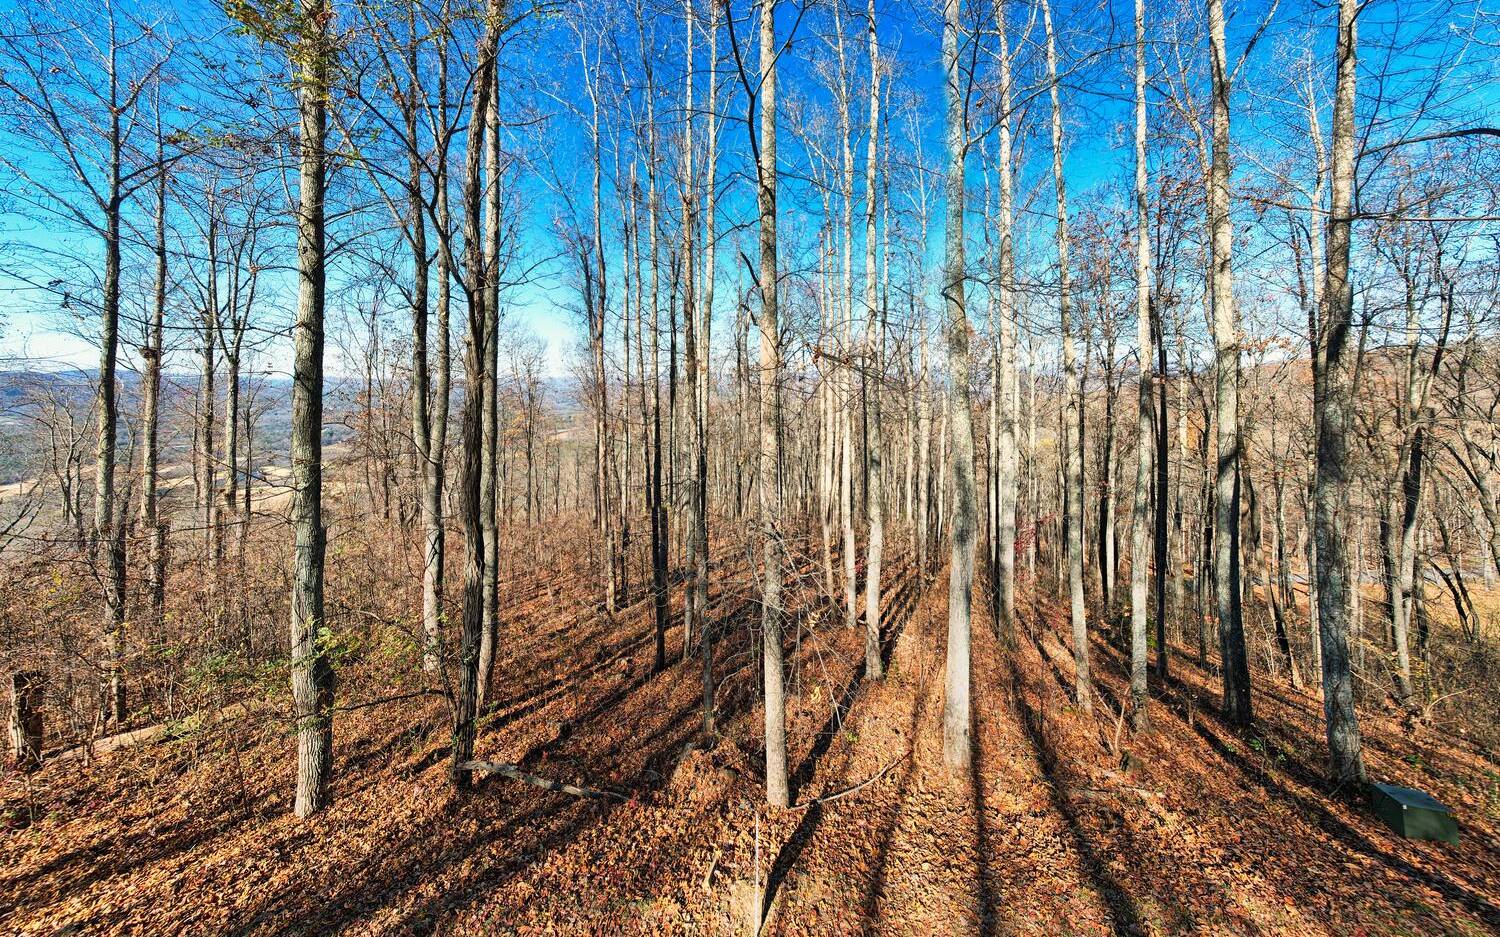 1.34 acres in Rocky Knob Estates Subdivision. Incredible views from this community. Vista pruning will expose even better views from the lot. Gated, well-maintained, paved roads for easy access, generous building site on knoll, lot is close to amenities including gazebo, fire pit and observation deck. Close to Young Harris College, Brasstown Valley Resort, waterfalls, lakes and US National Forest.